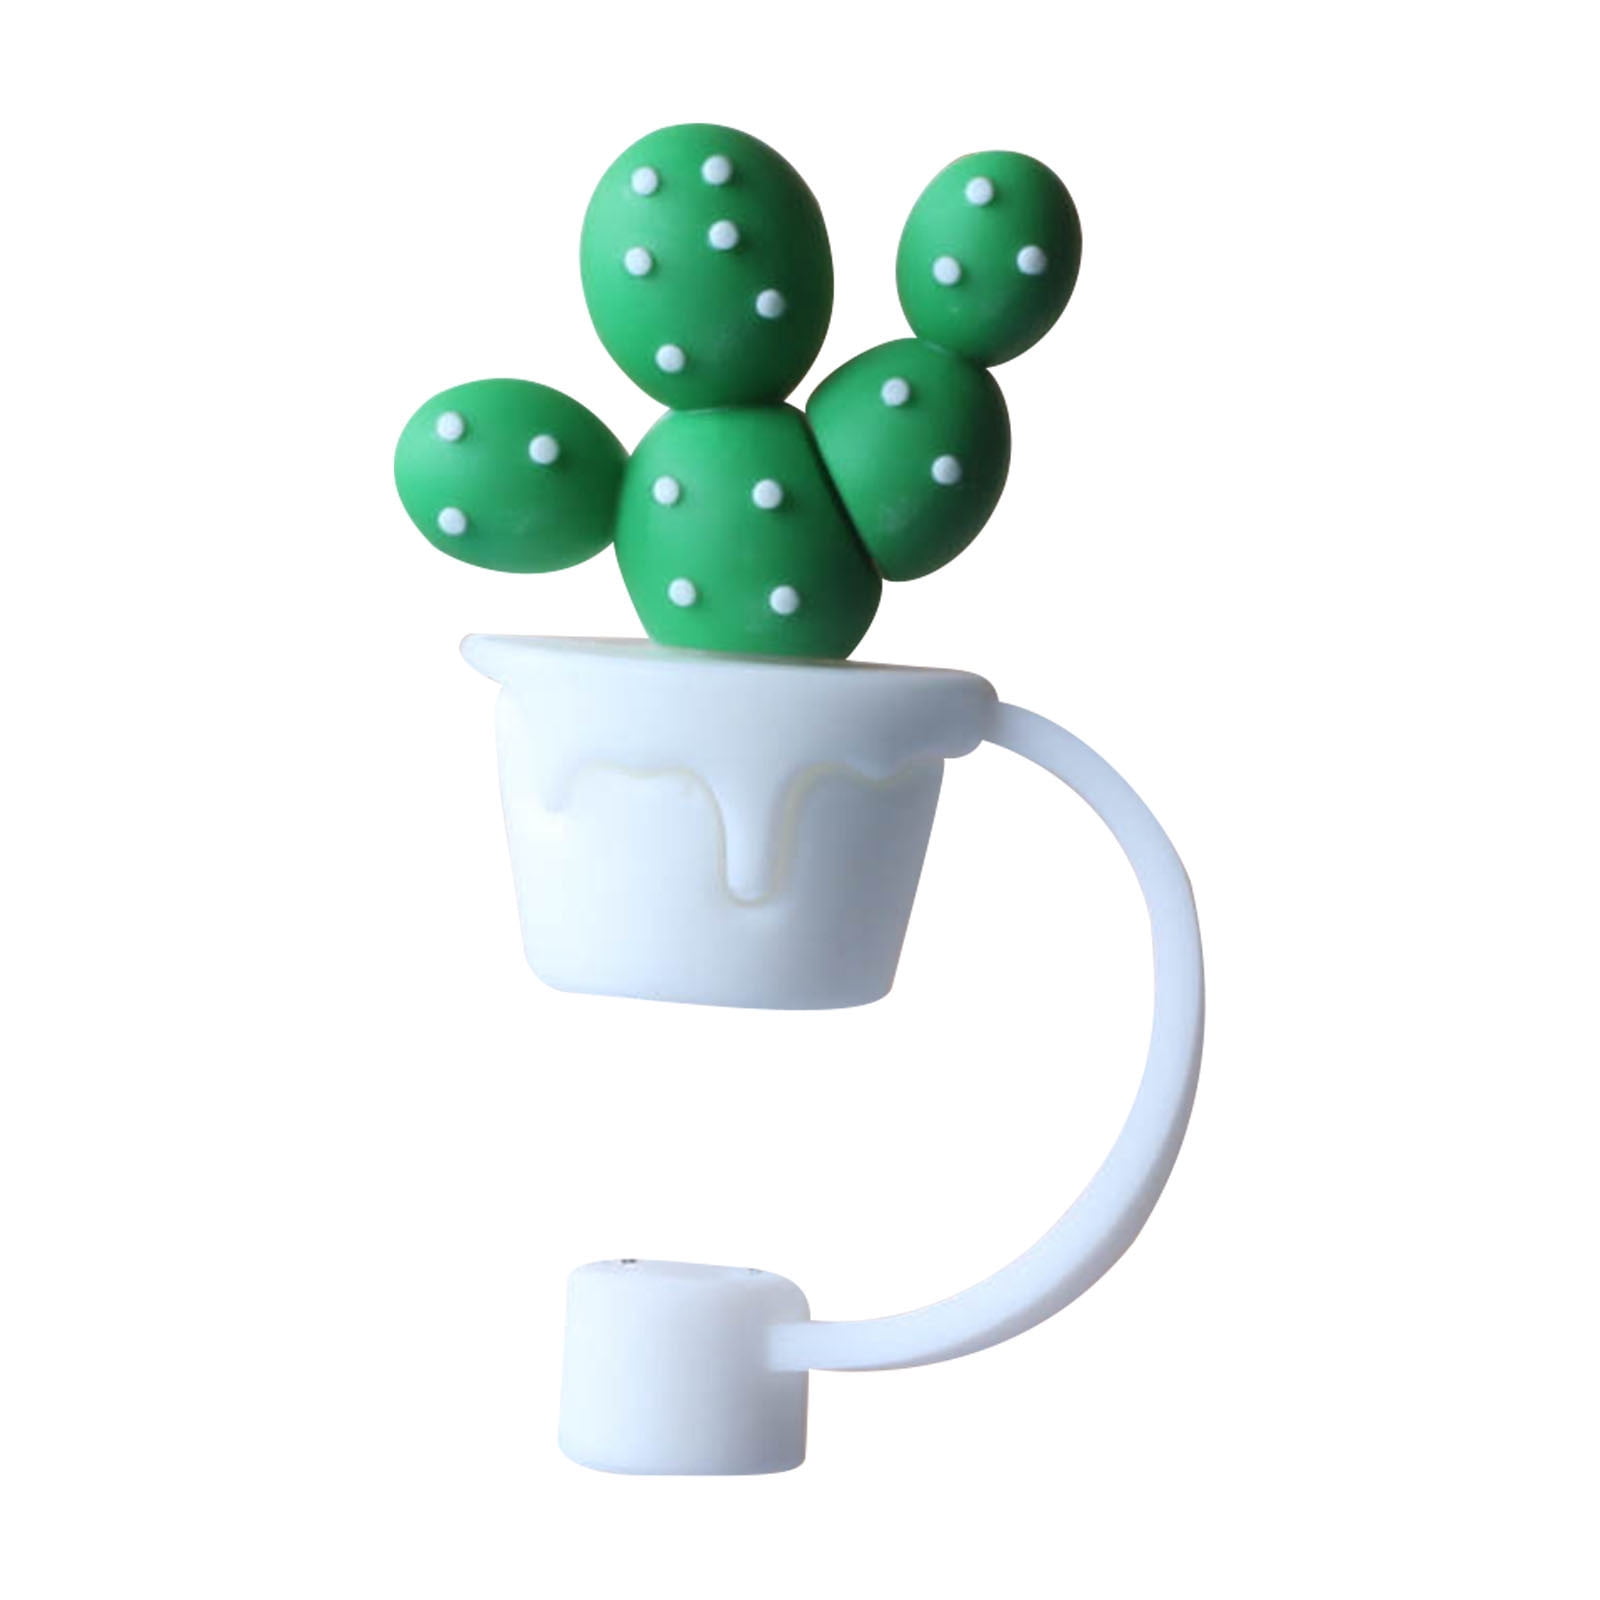 Beyonday 7pcs Silicone Cactus Shape Straw Cover Cap Kit, Reusable Drinking  Dust Plugs Set Spill Proof Straw Tips Cover Cartoon Cactus Cup Stopper Cup